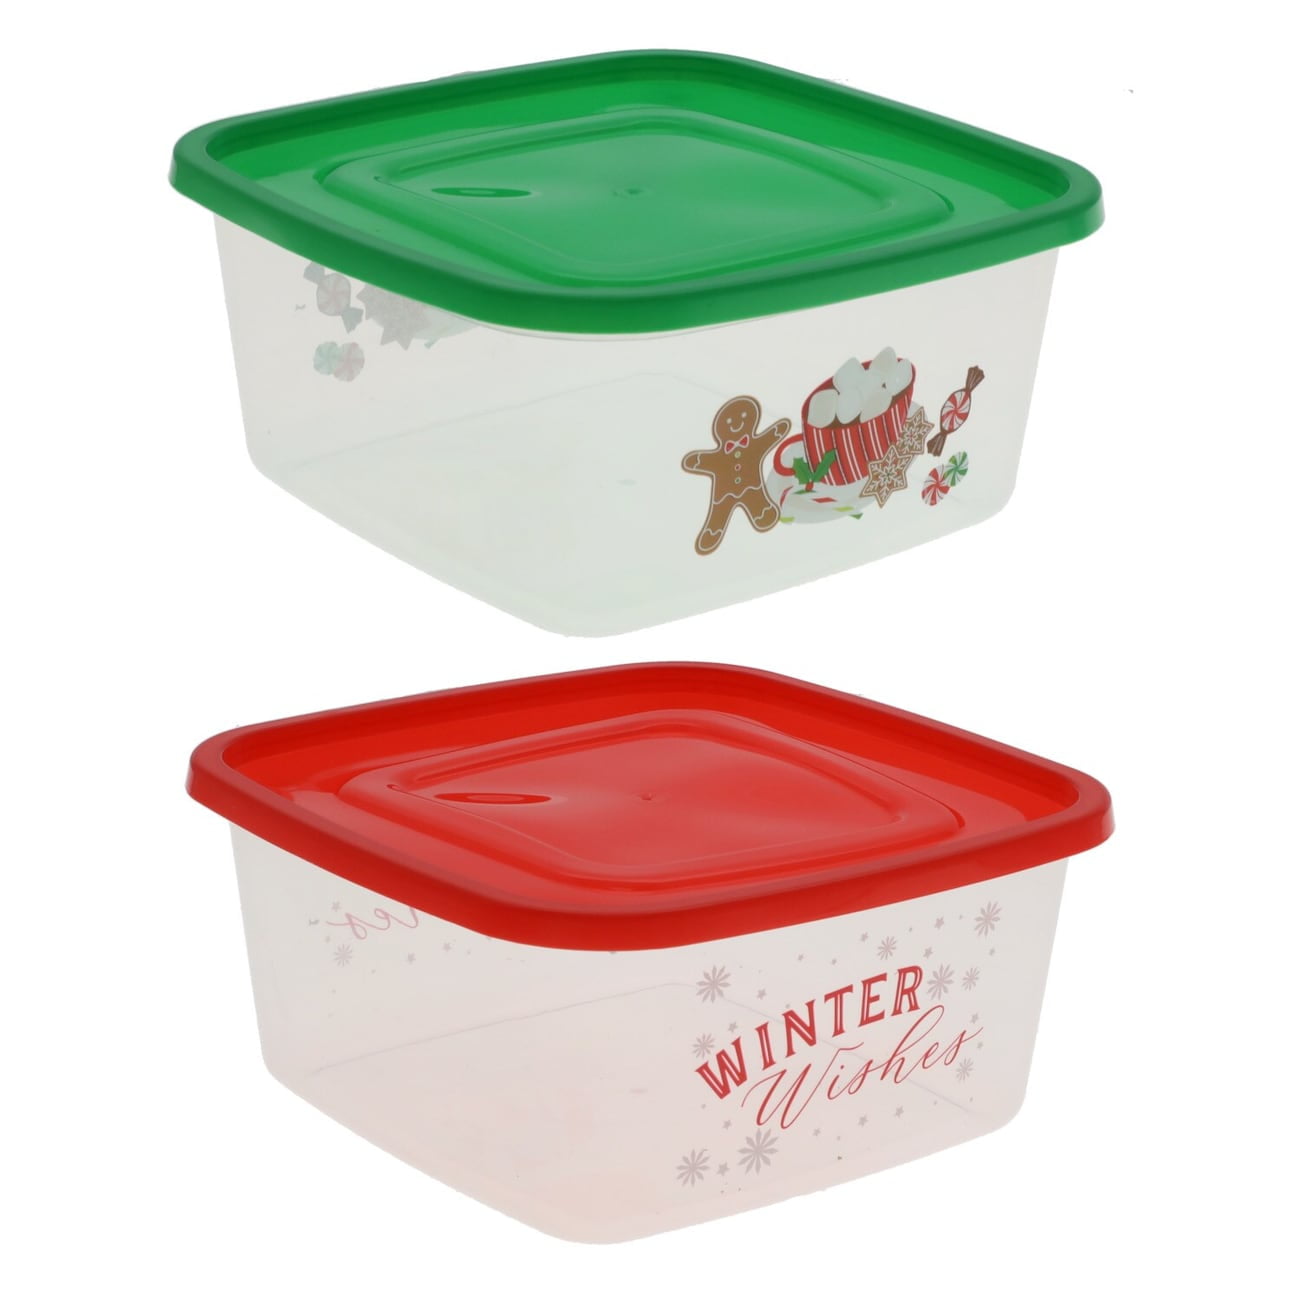 CGT Set of 2 Holiday Christmas Navidad Gnome and Truck Plastic Containers  with Lids 12.5 oz. Treat Goodies Cookies Snacks Candy Party Leftovers